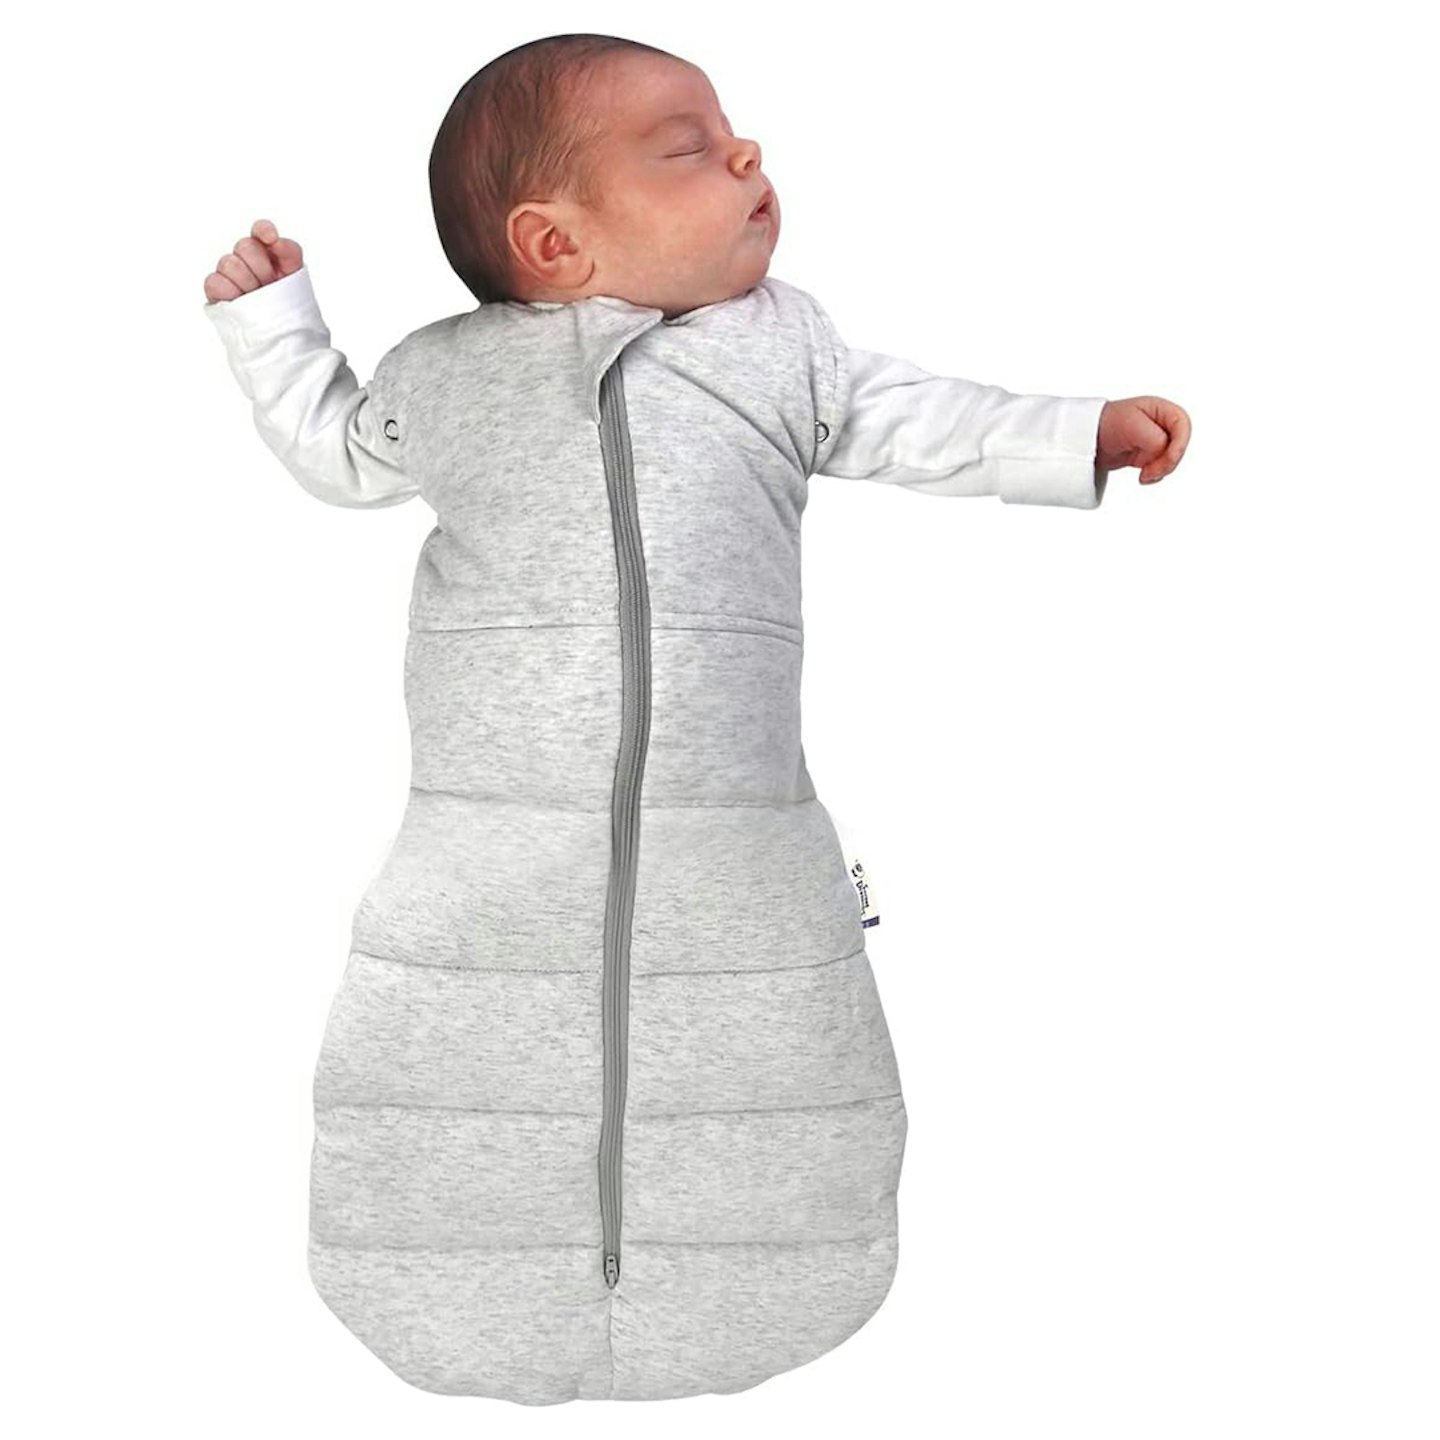 Find out how our Mother and Baby awards testers got on with the transitional Sweet Dreamers Bamboo Sleep Swaddle Bag.